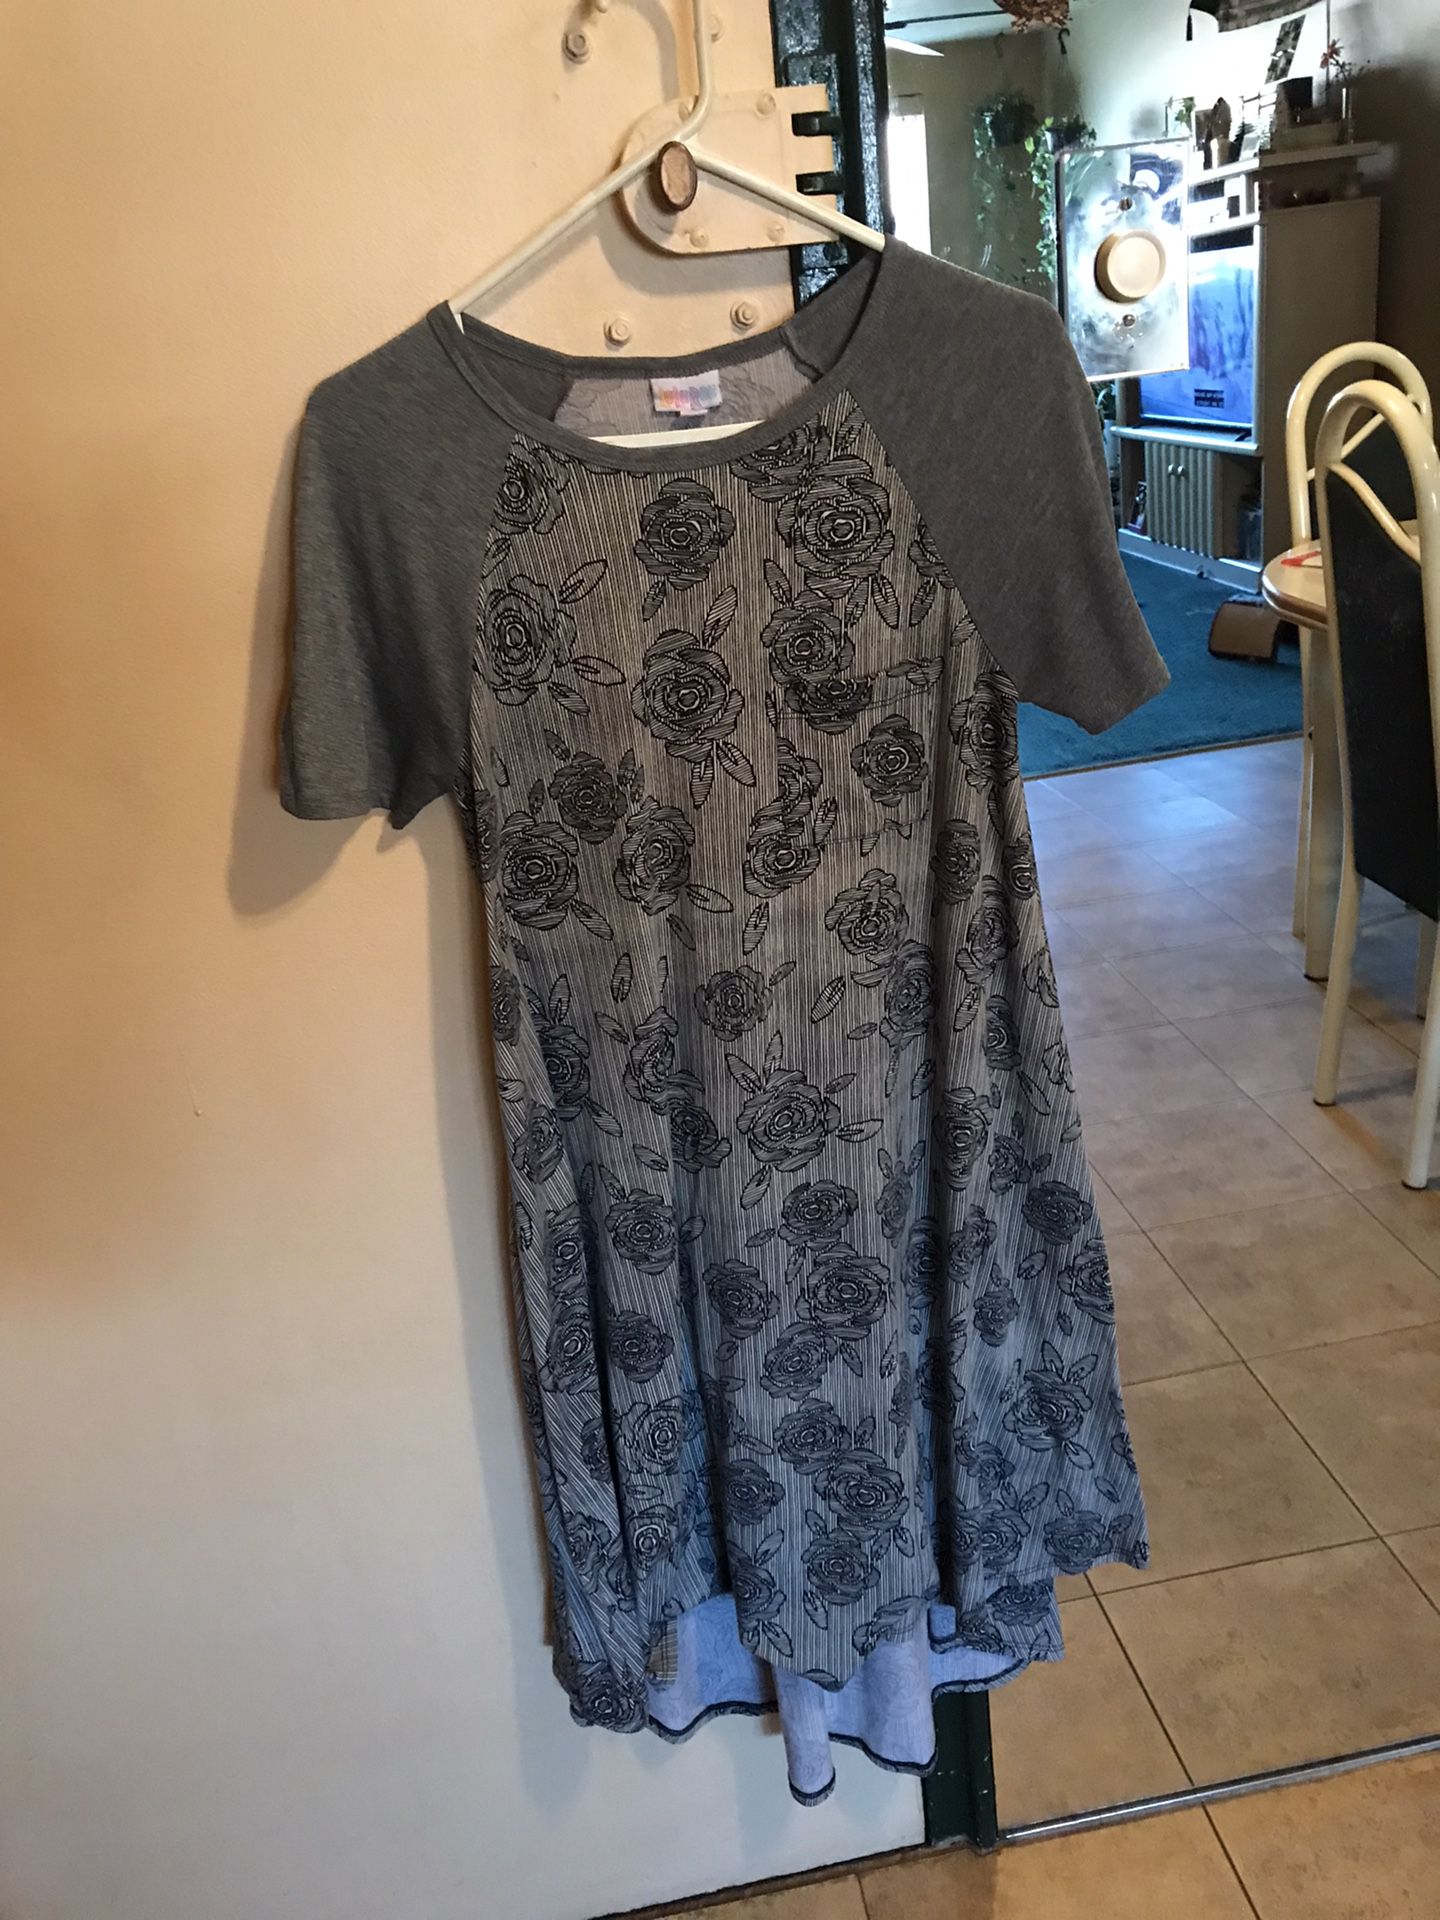 Dress by LulaRoe - Excellent Cond.  Small